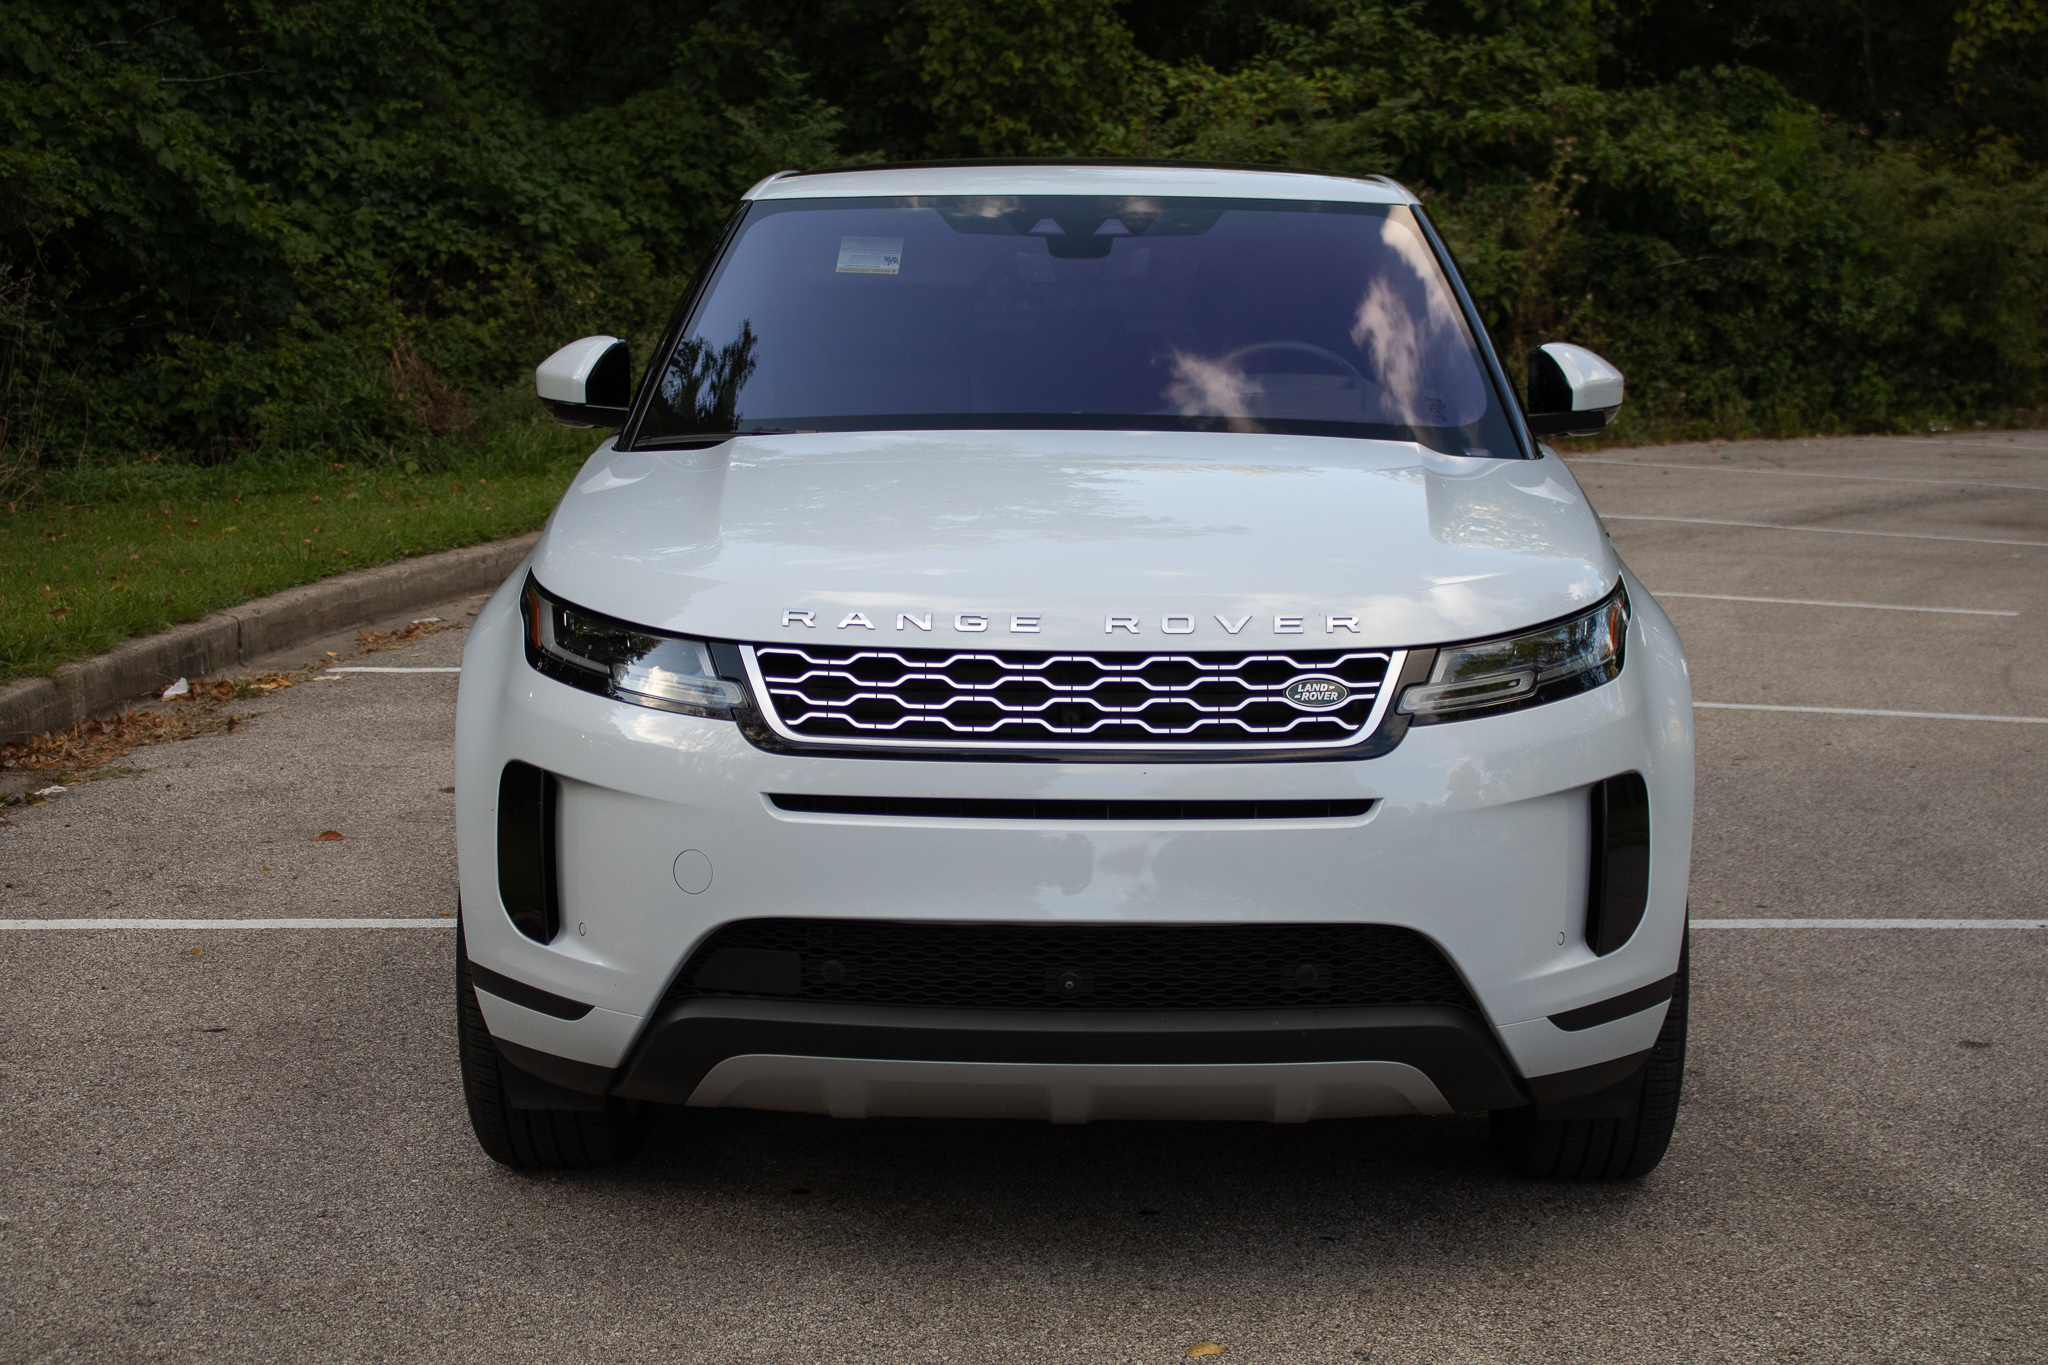 Review: 2020 Range Rover Evoque goes big on luxury, price tag